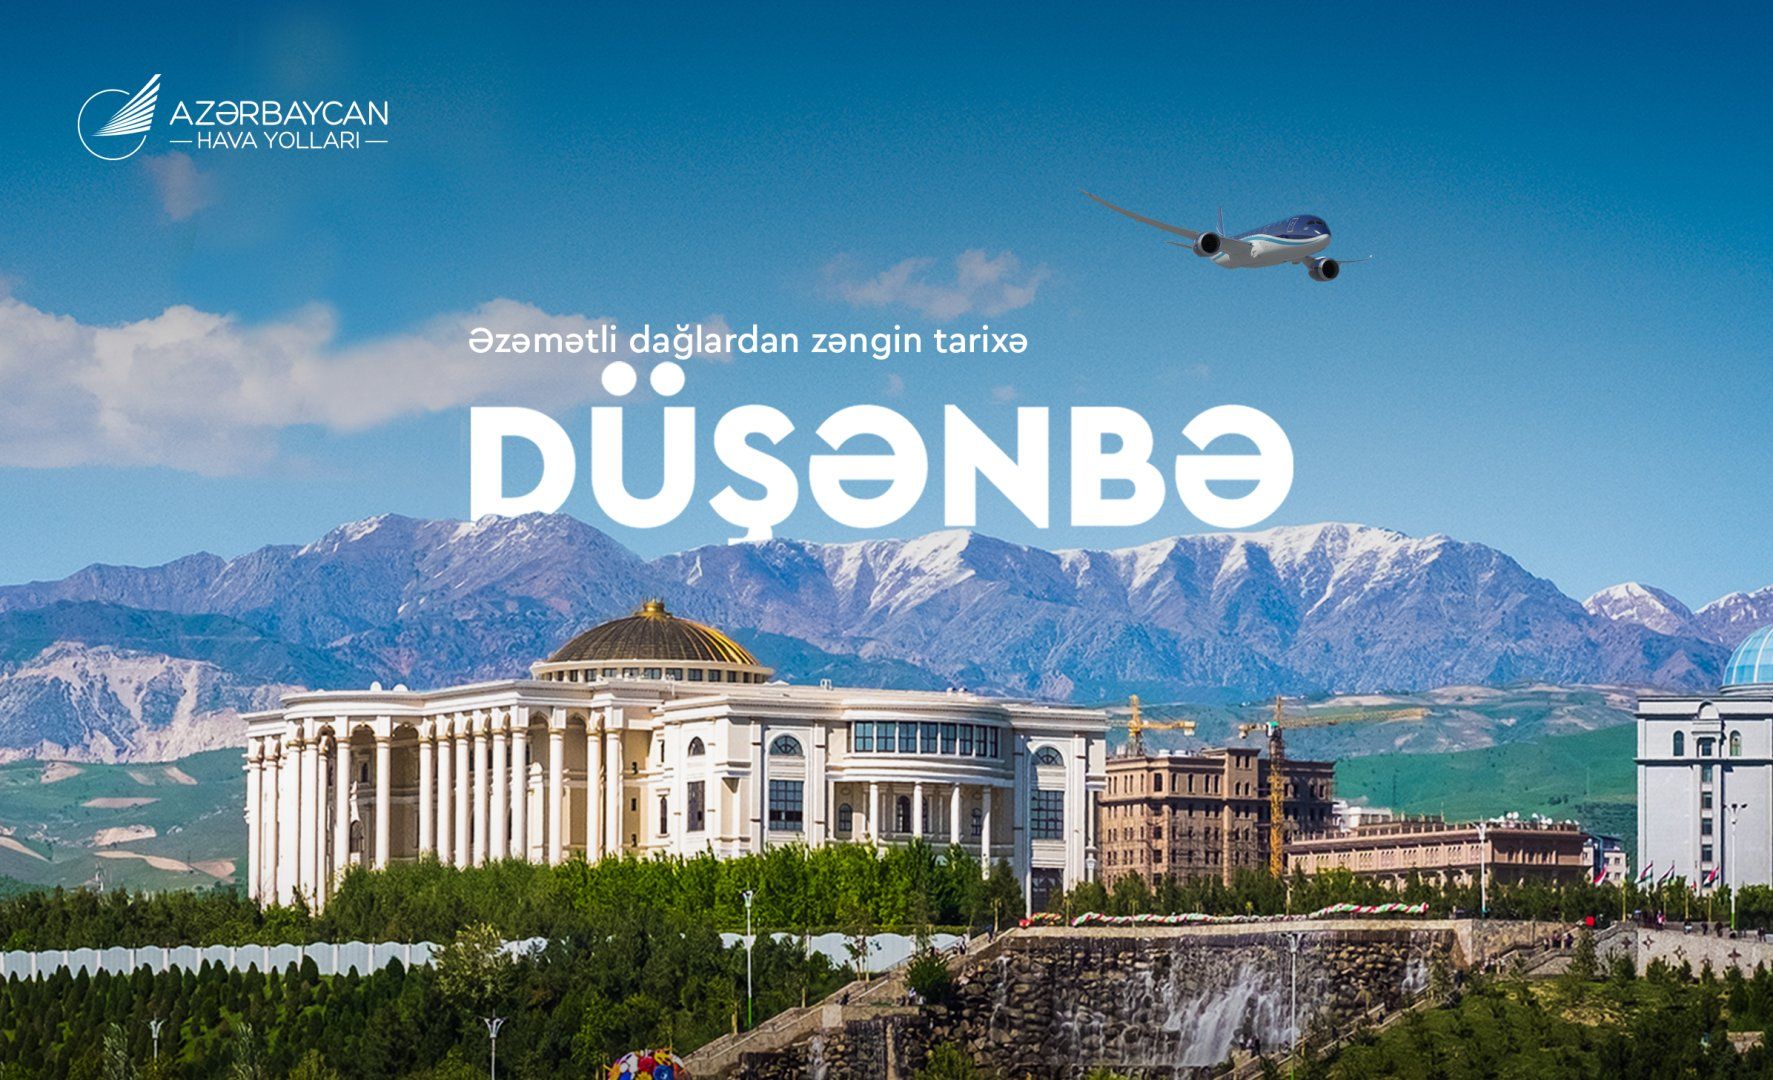 AZAL starts selling tickets for flights between Baku and Dushanbe